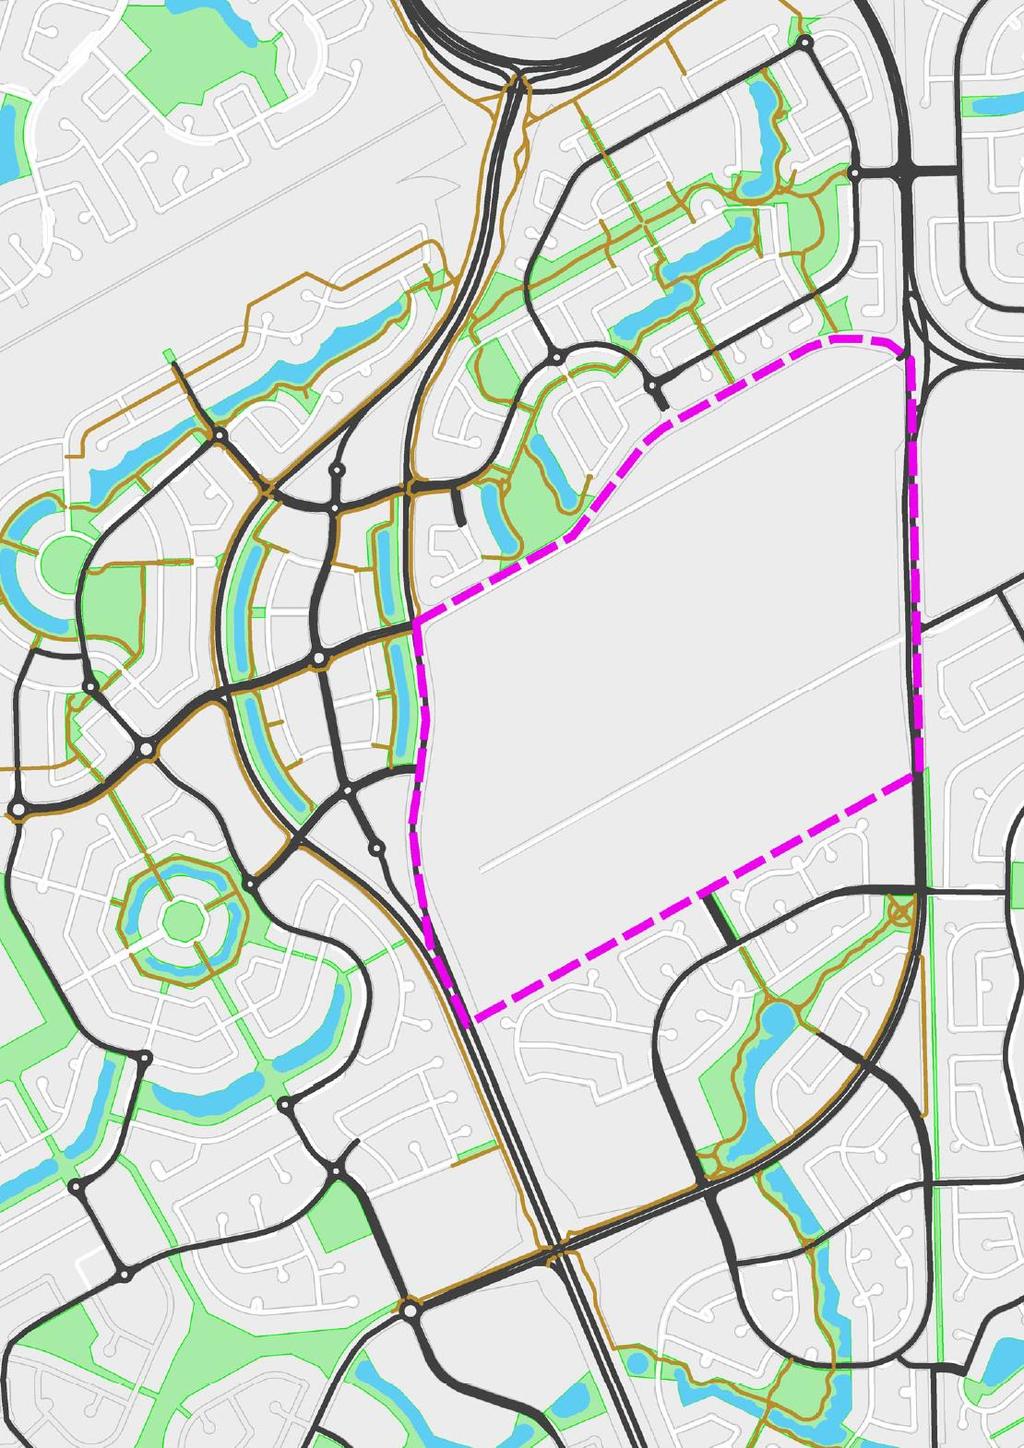 8 Existing Transportation Bridgwater Forest Networks Bridgwater Lakes averley est B LEGEND averley est B will eventually have patterns of roads and active transportation paths similar to those in